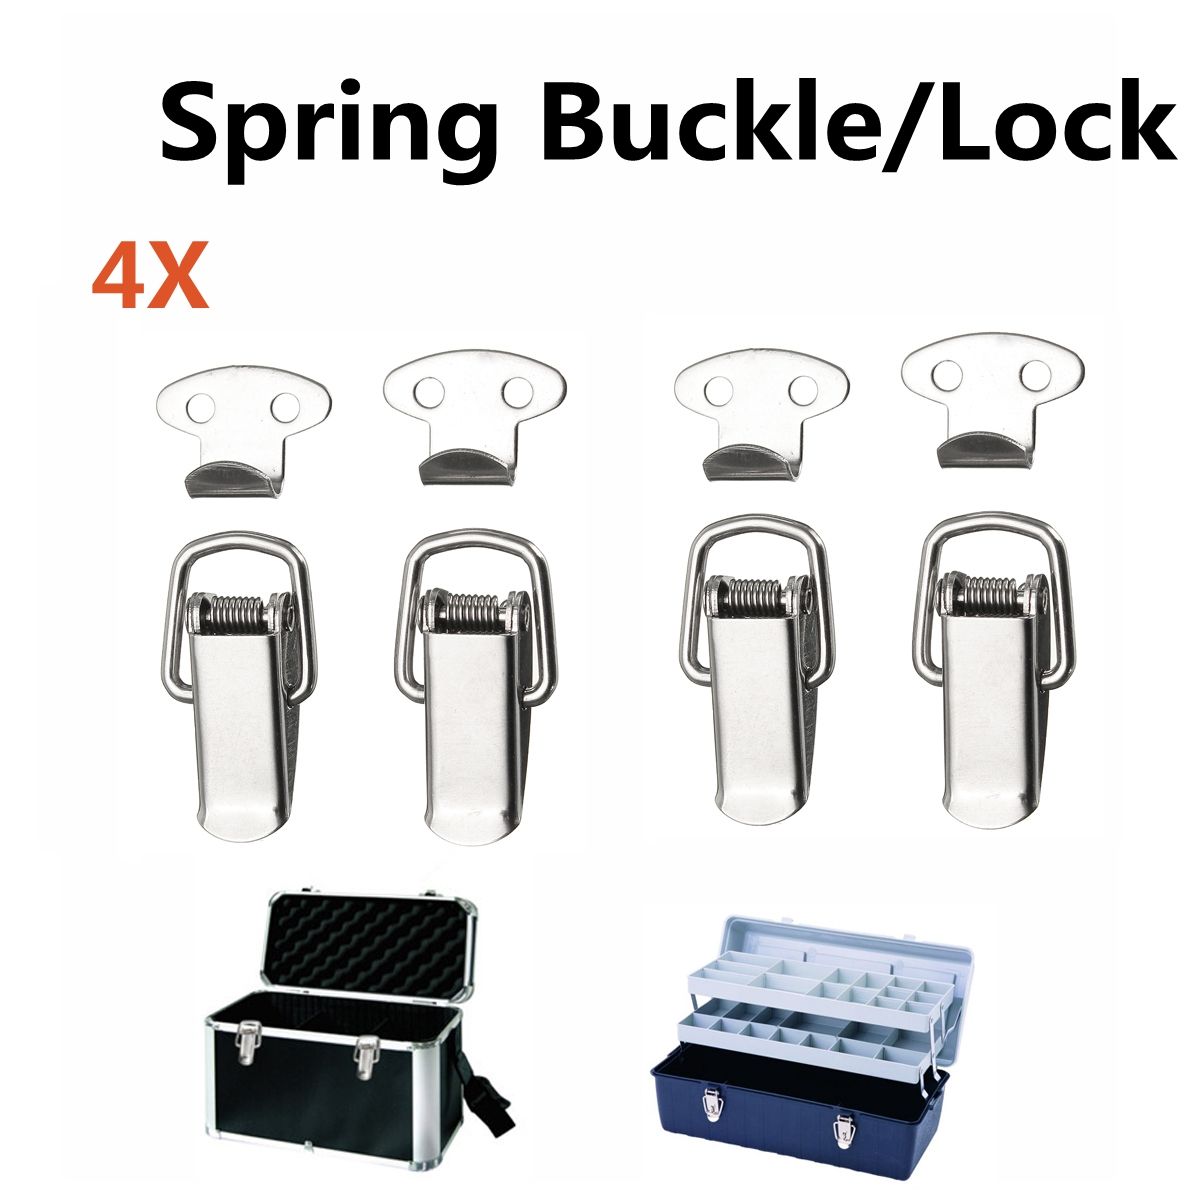 4Pcs-201-Stainless-Steel-Wooden-Case-Box-Buckle-Spring-Lock-1218509